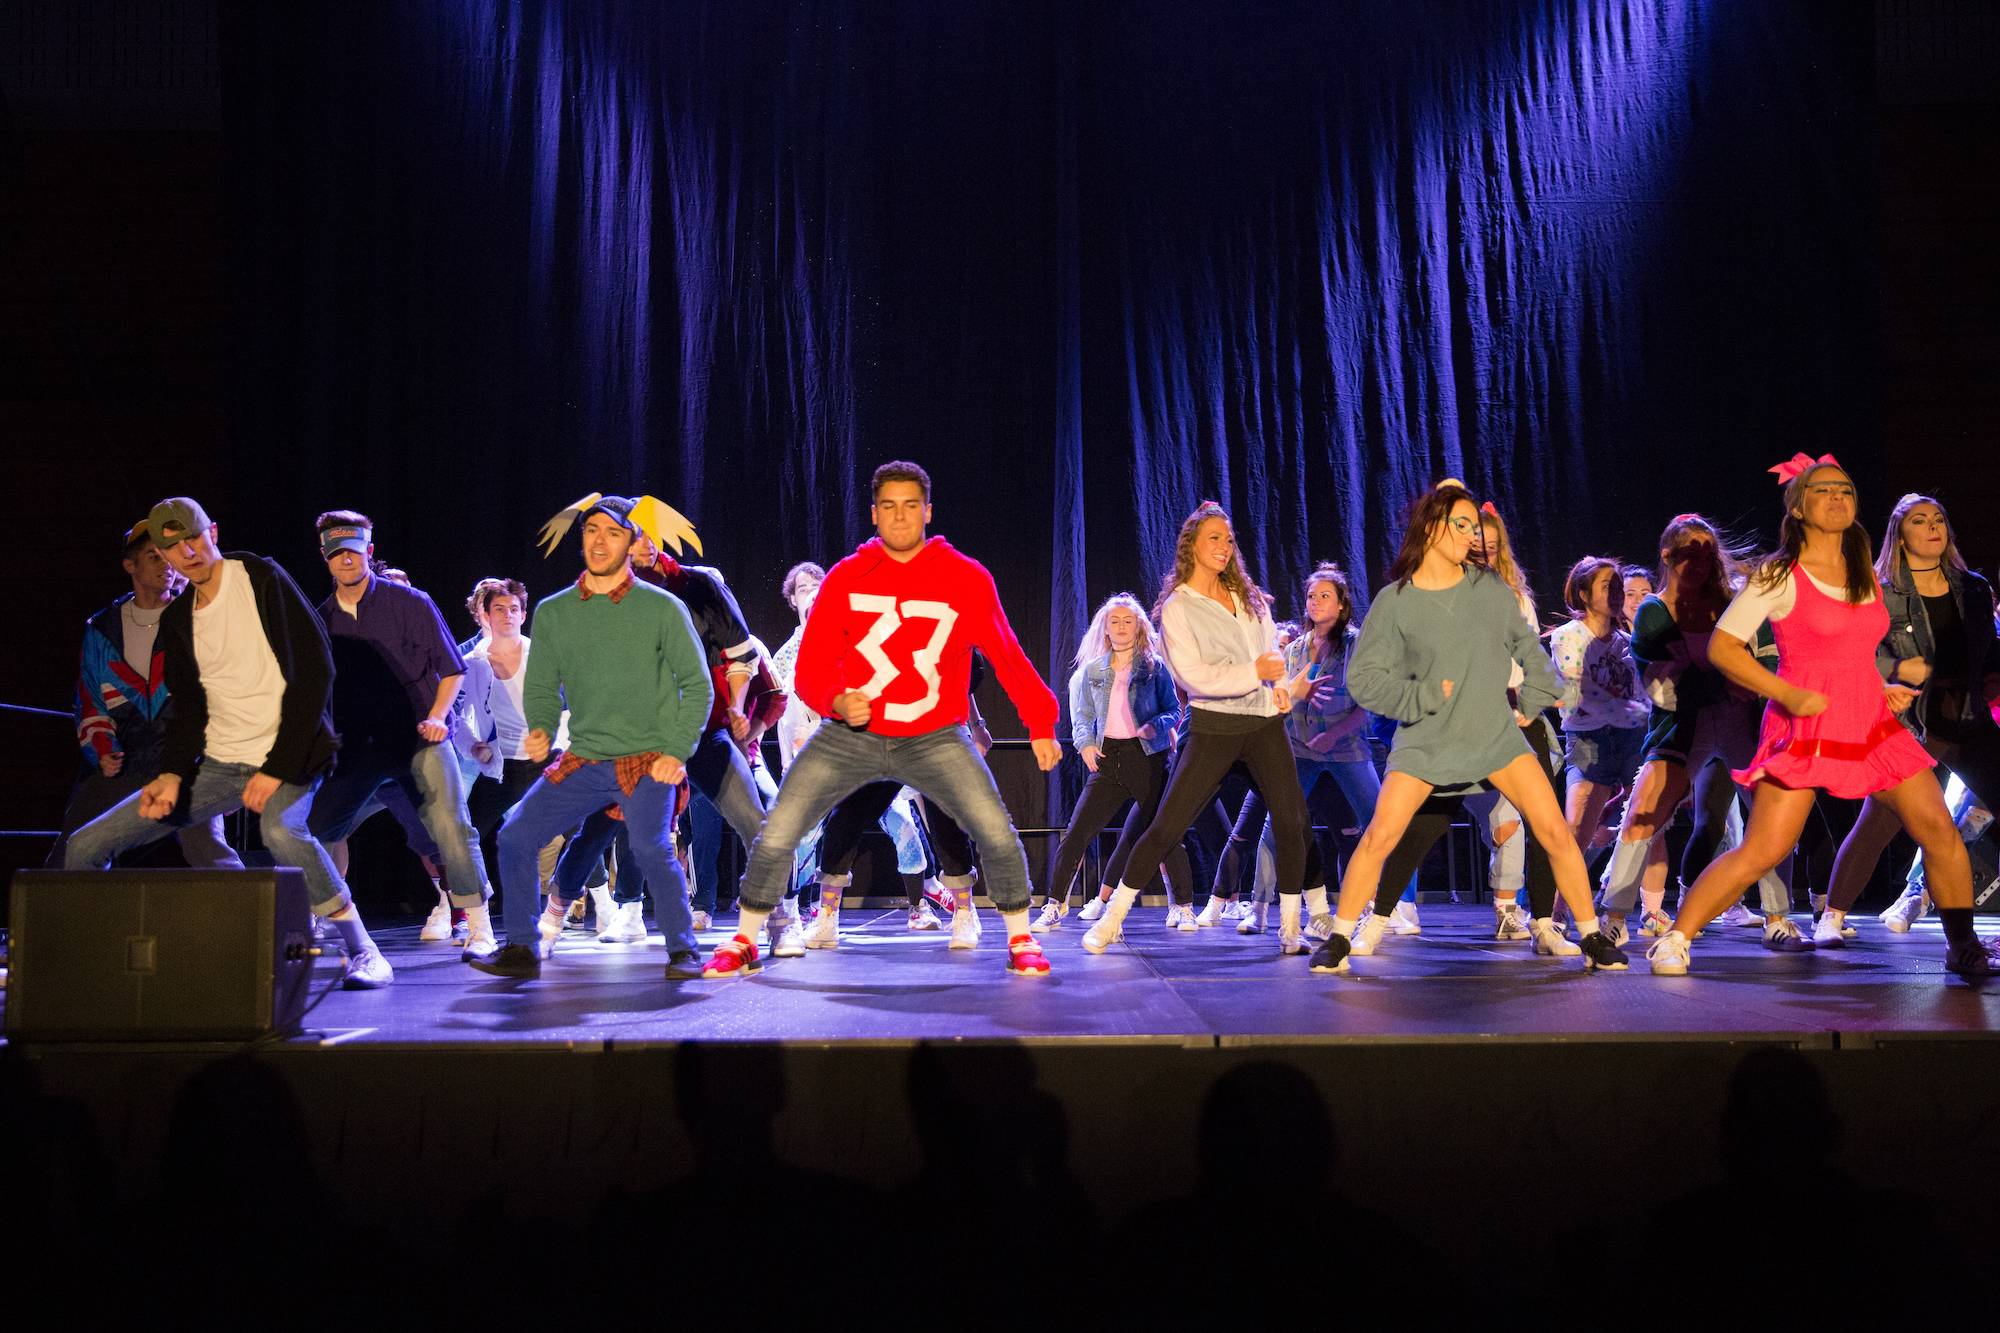 Greek life students dancing on stage at the lip syncing battle